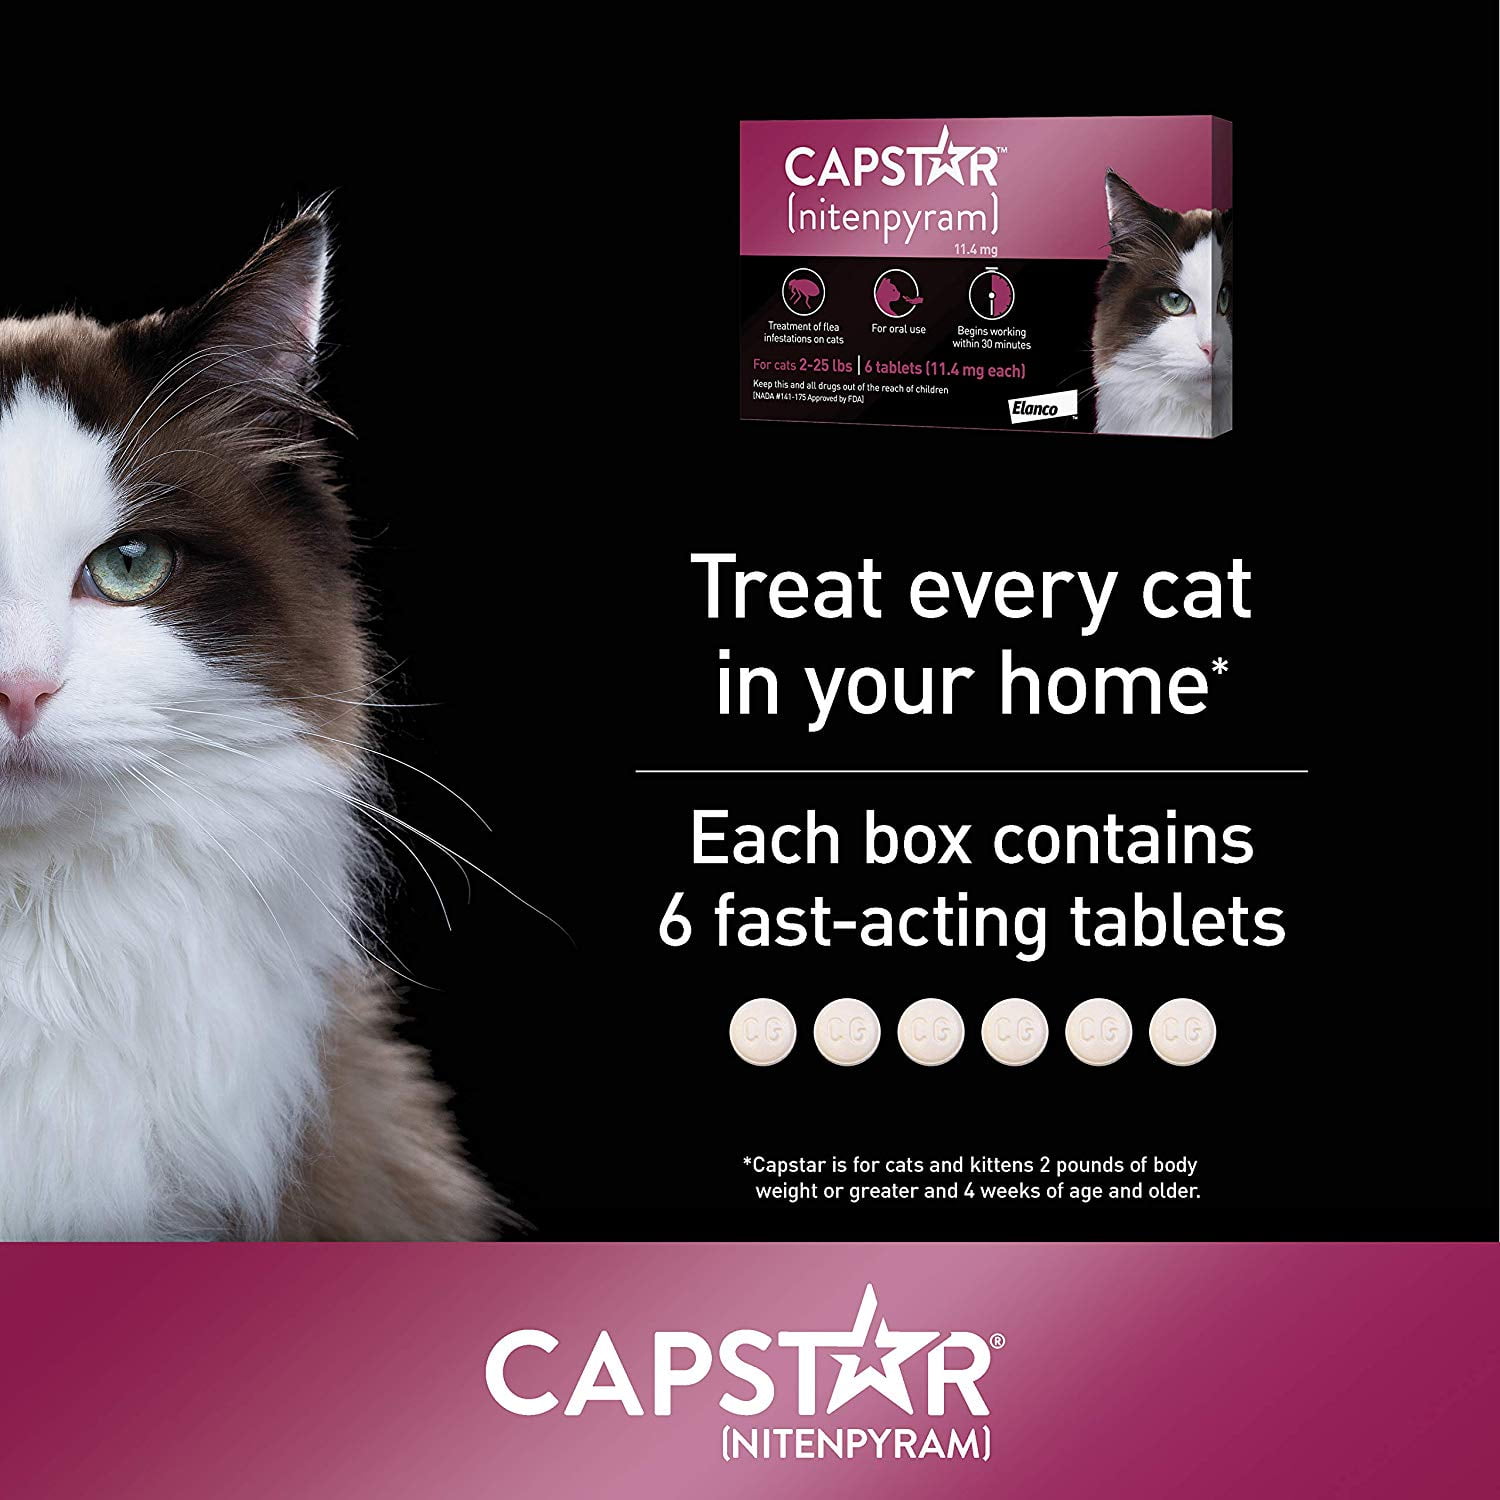 capstar tablets for cats